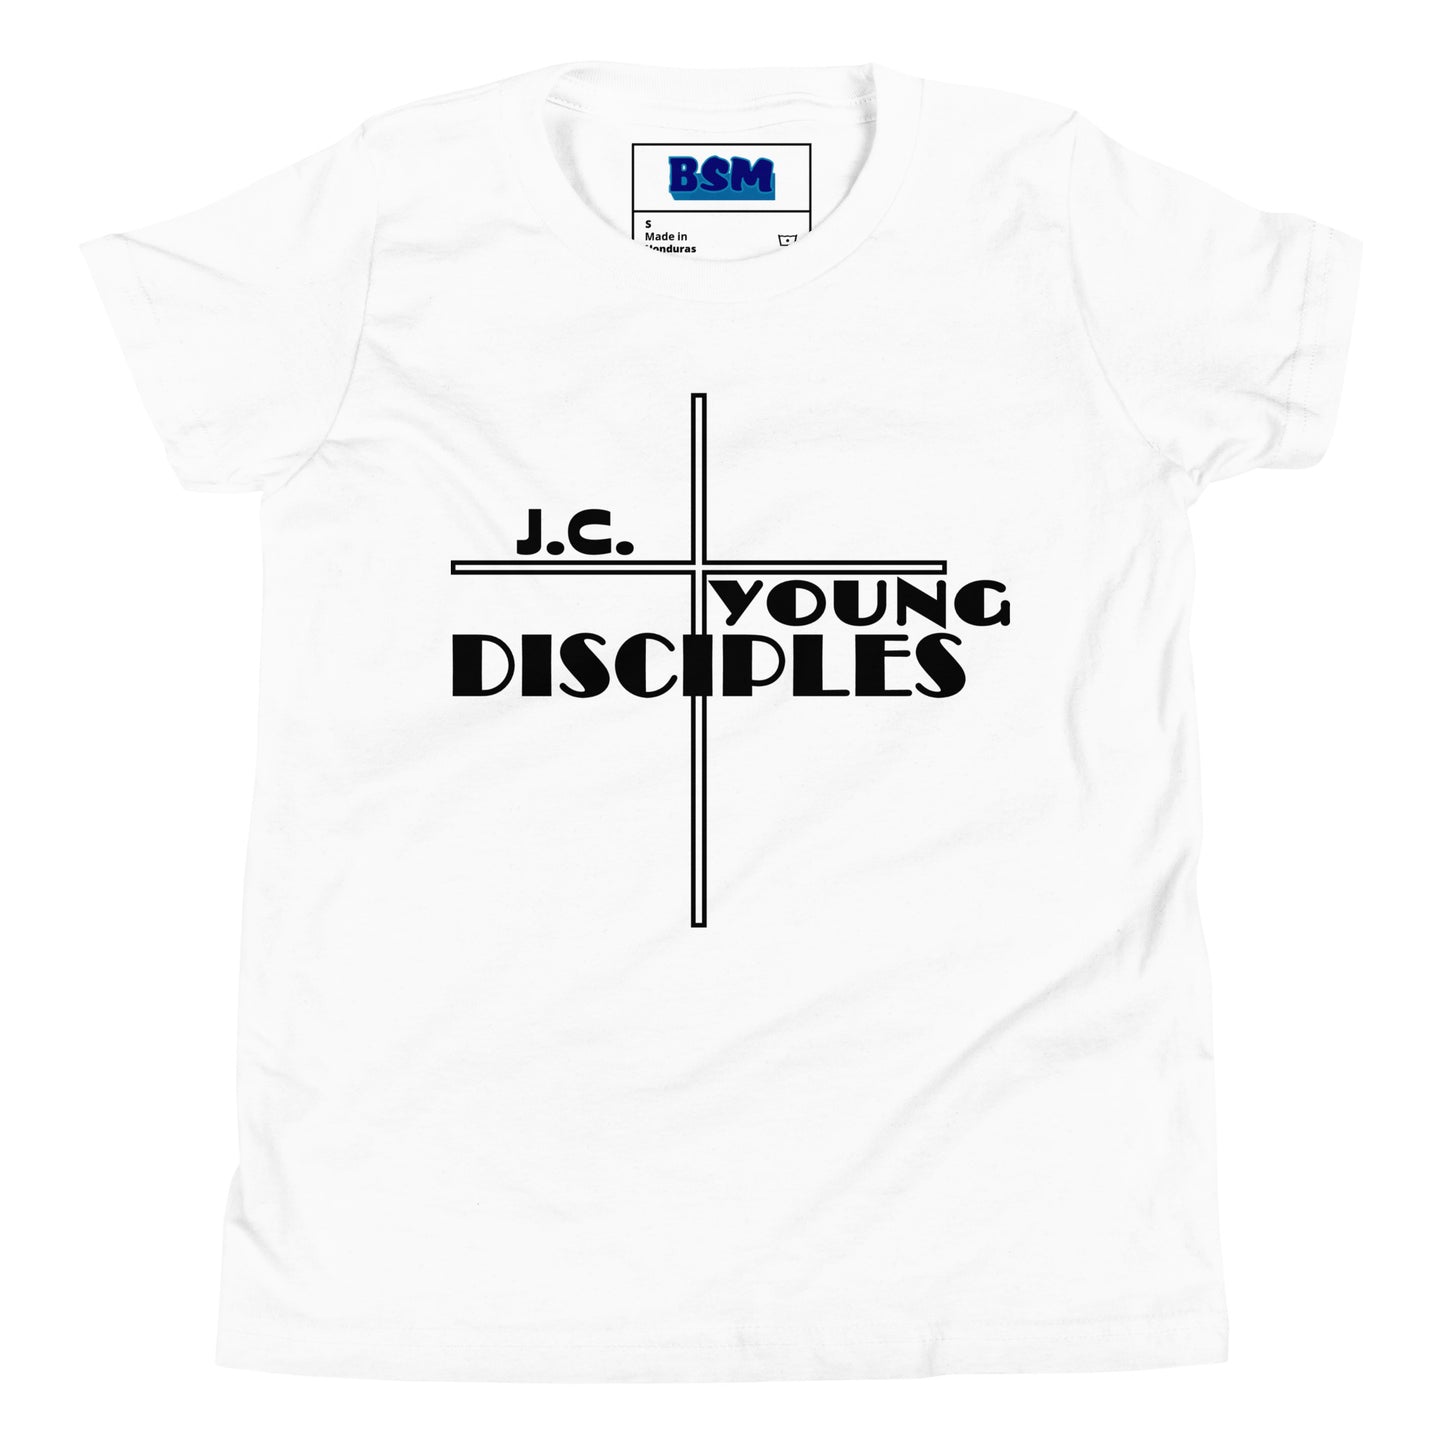 J.C. Young Disciples Youth T-Shirt